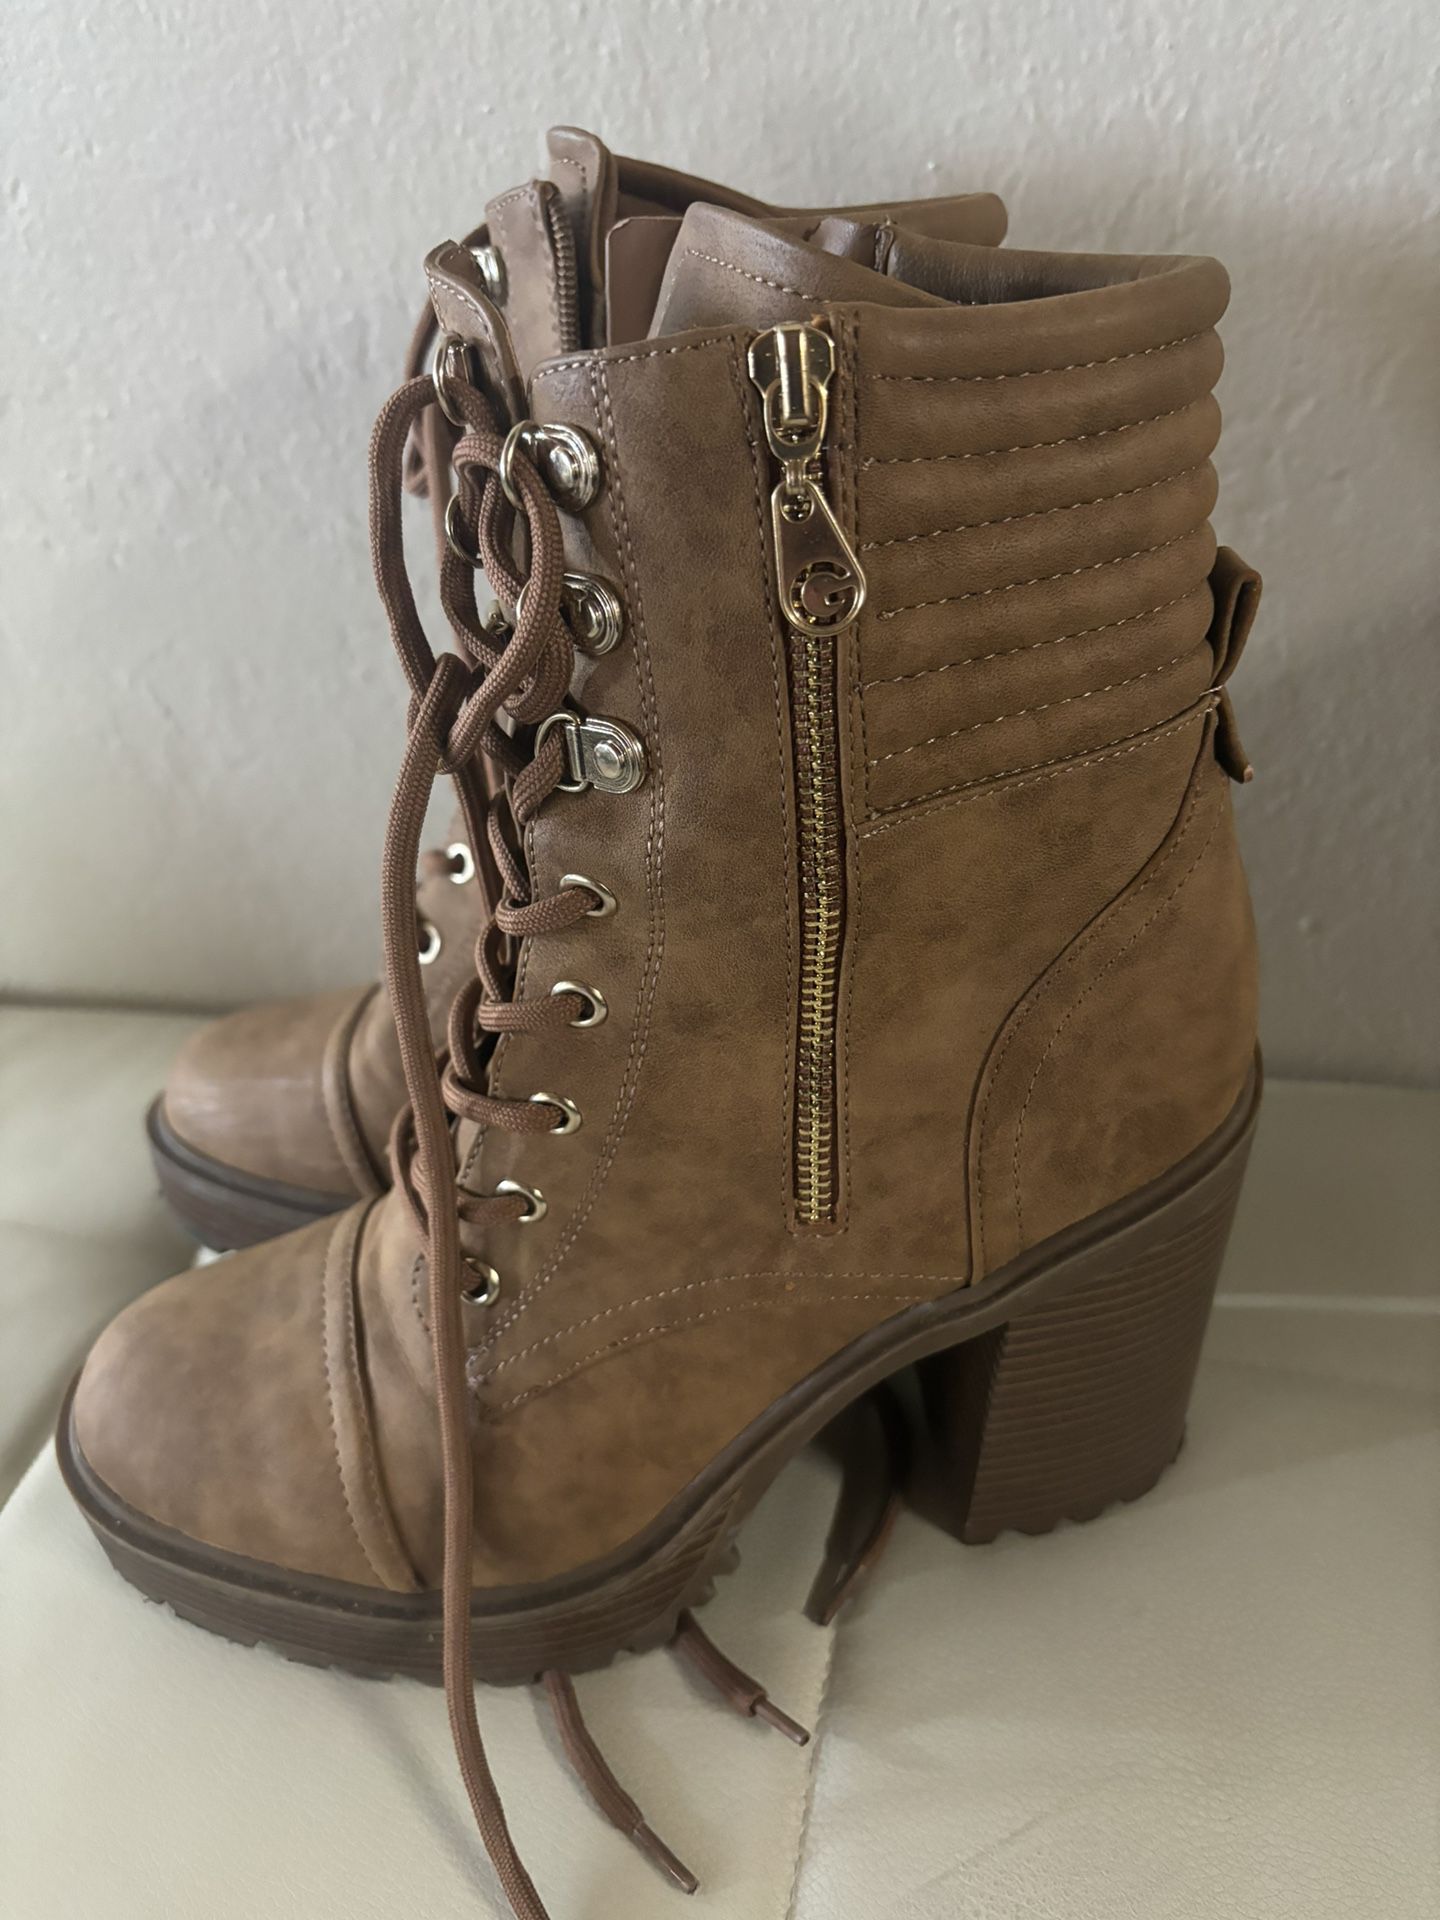 GBG Los Angeles Boots Women's Size 9 Honey Chunky Heel  Lace Up 